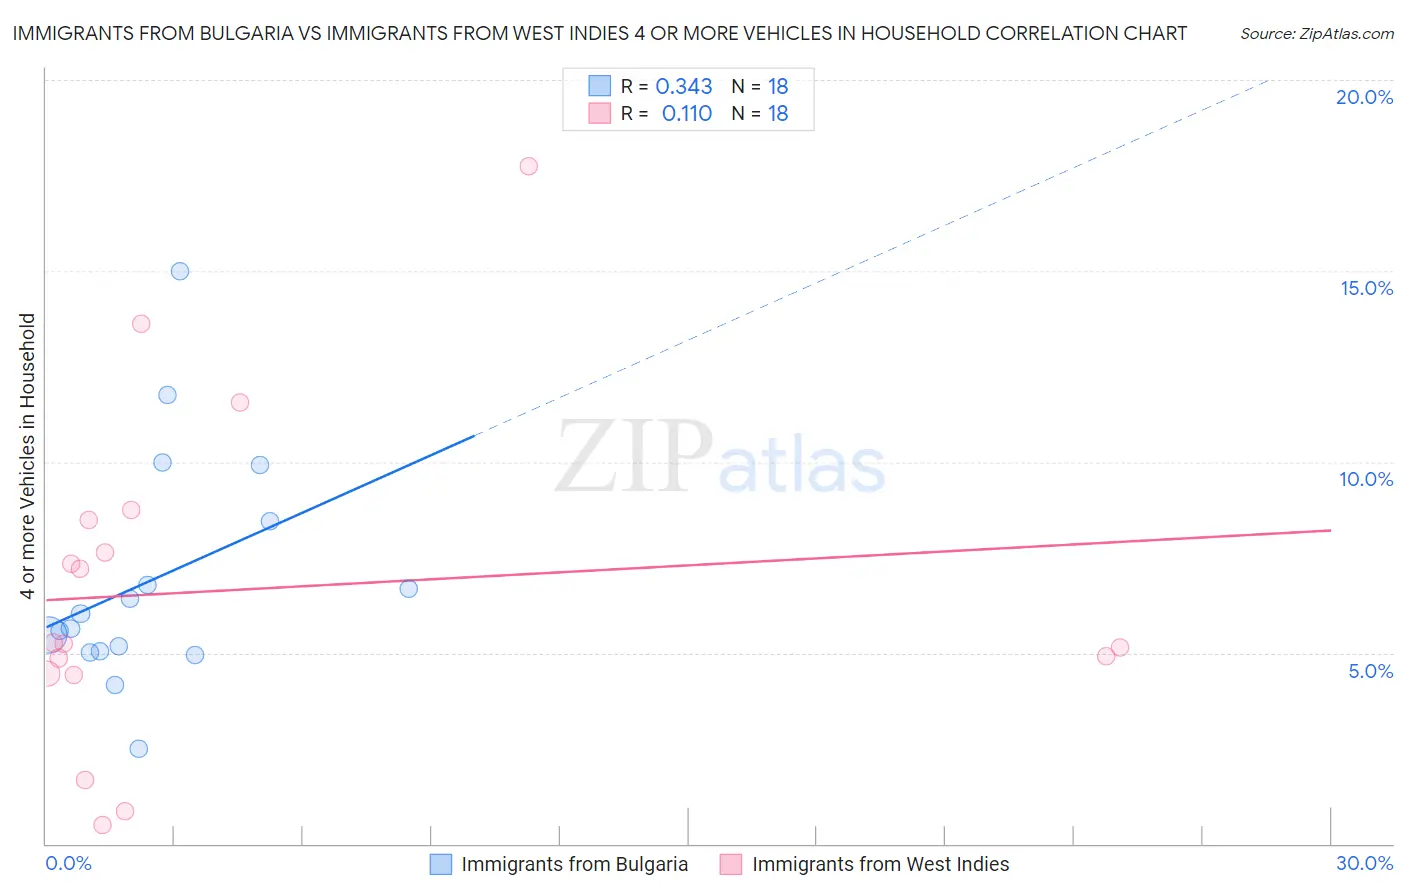 Immigrants from Bulgaria vs Immigrants from West Indies 4 or more Vehicles in Household